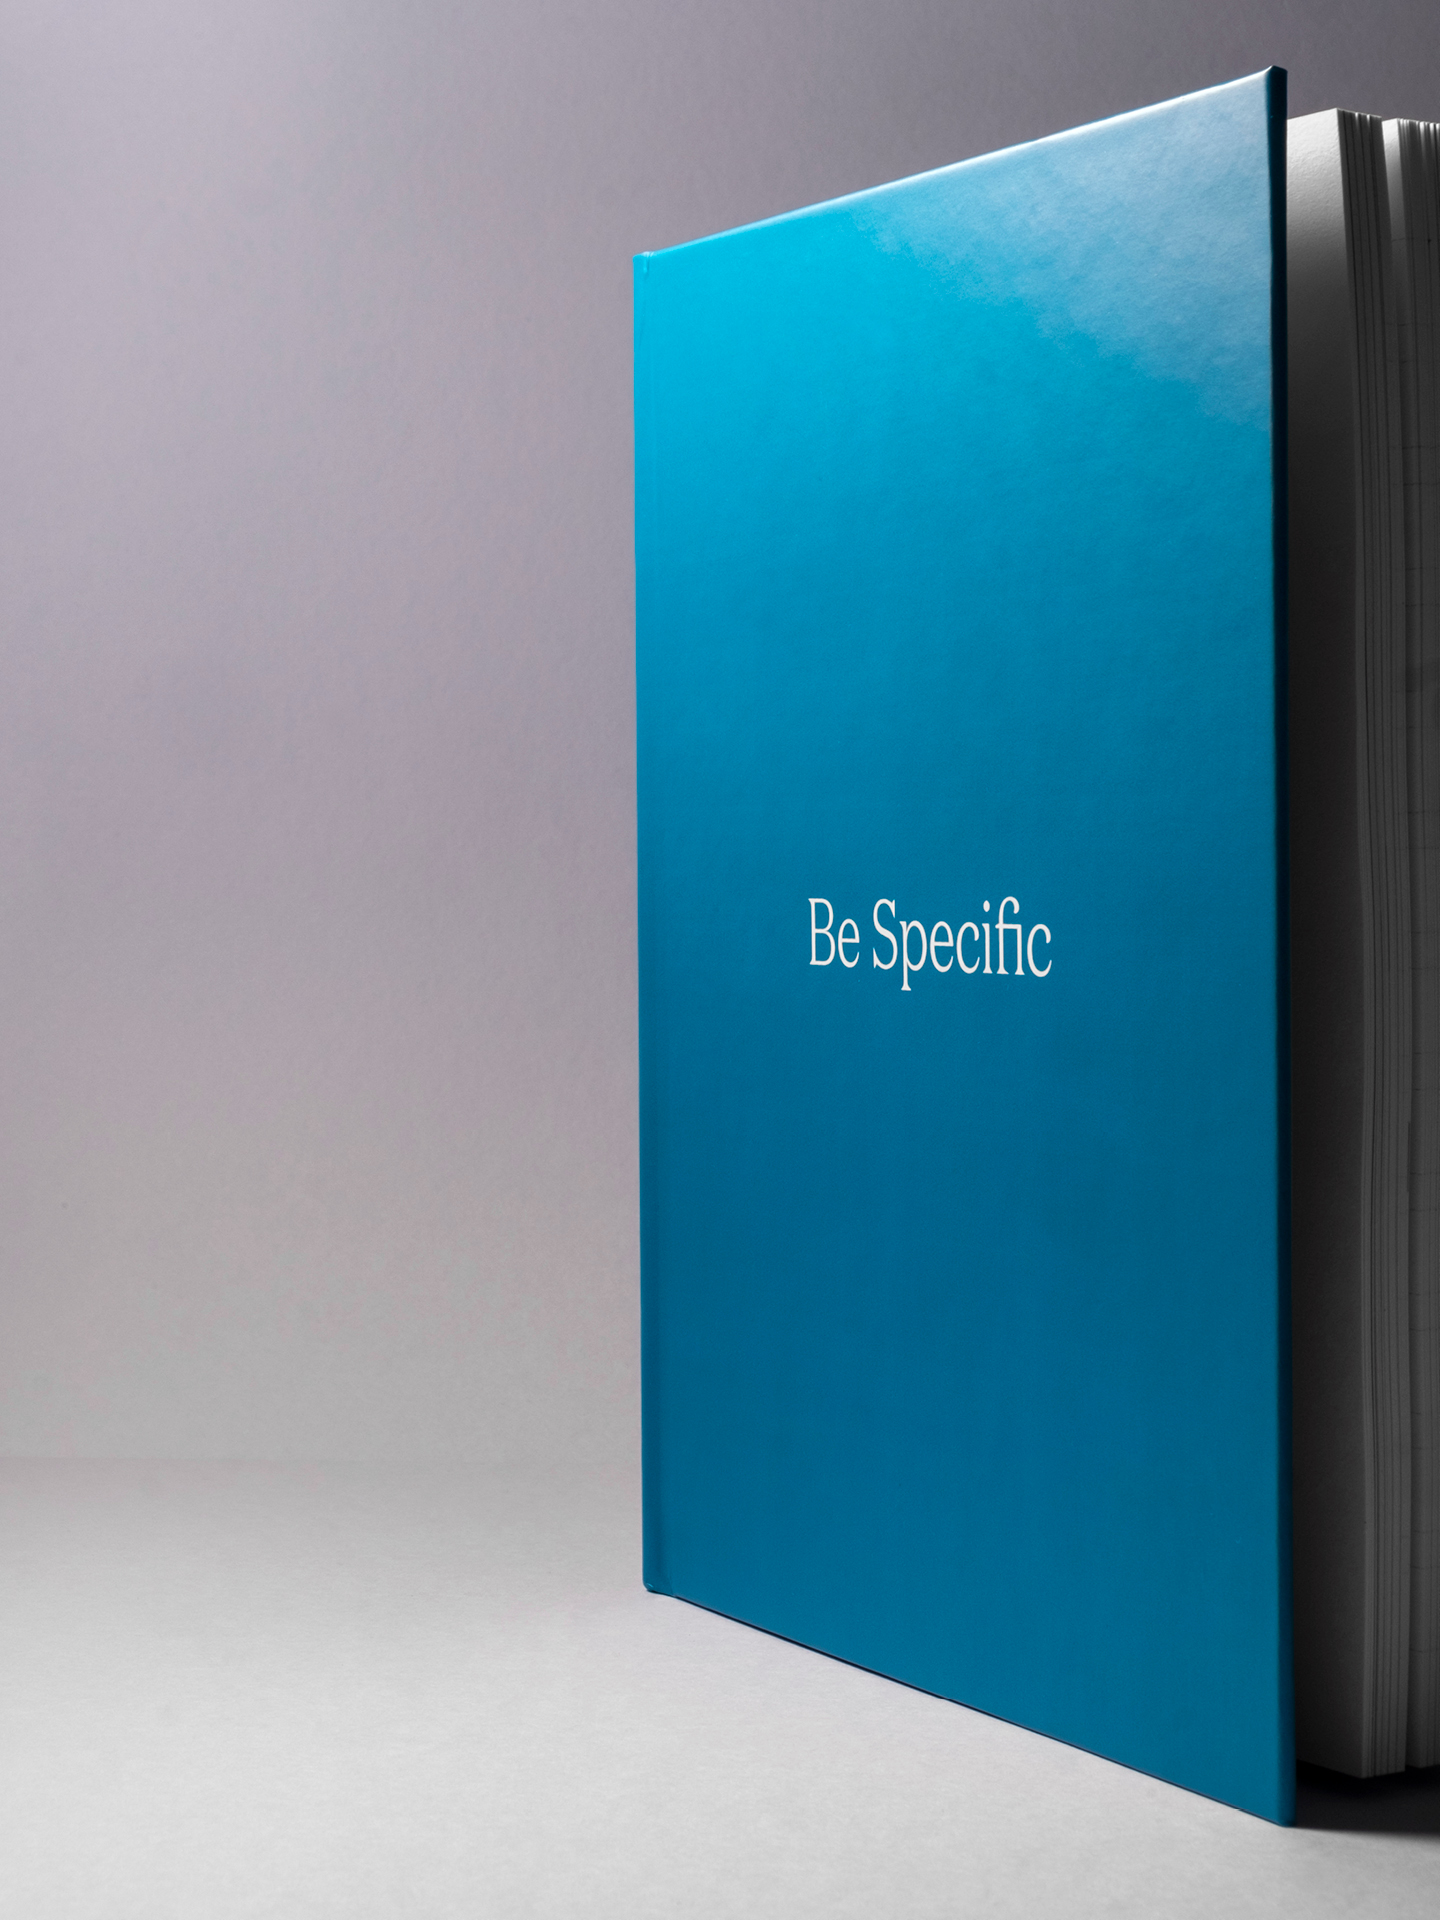 The cover of the Be Specific book set in white type on a hardback blue cover